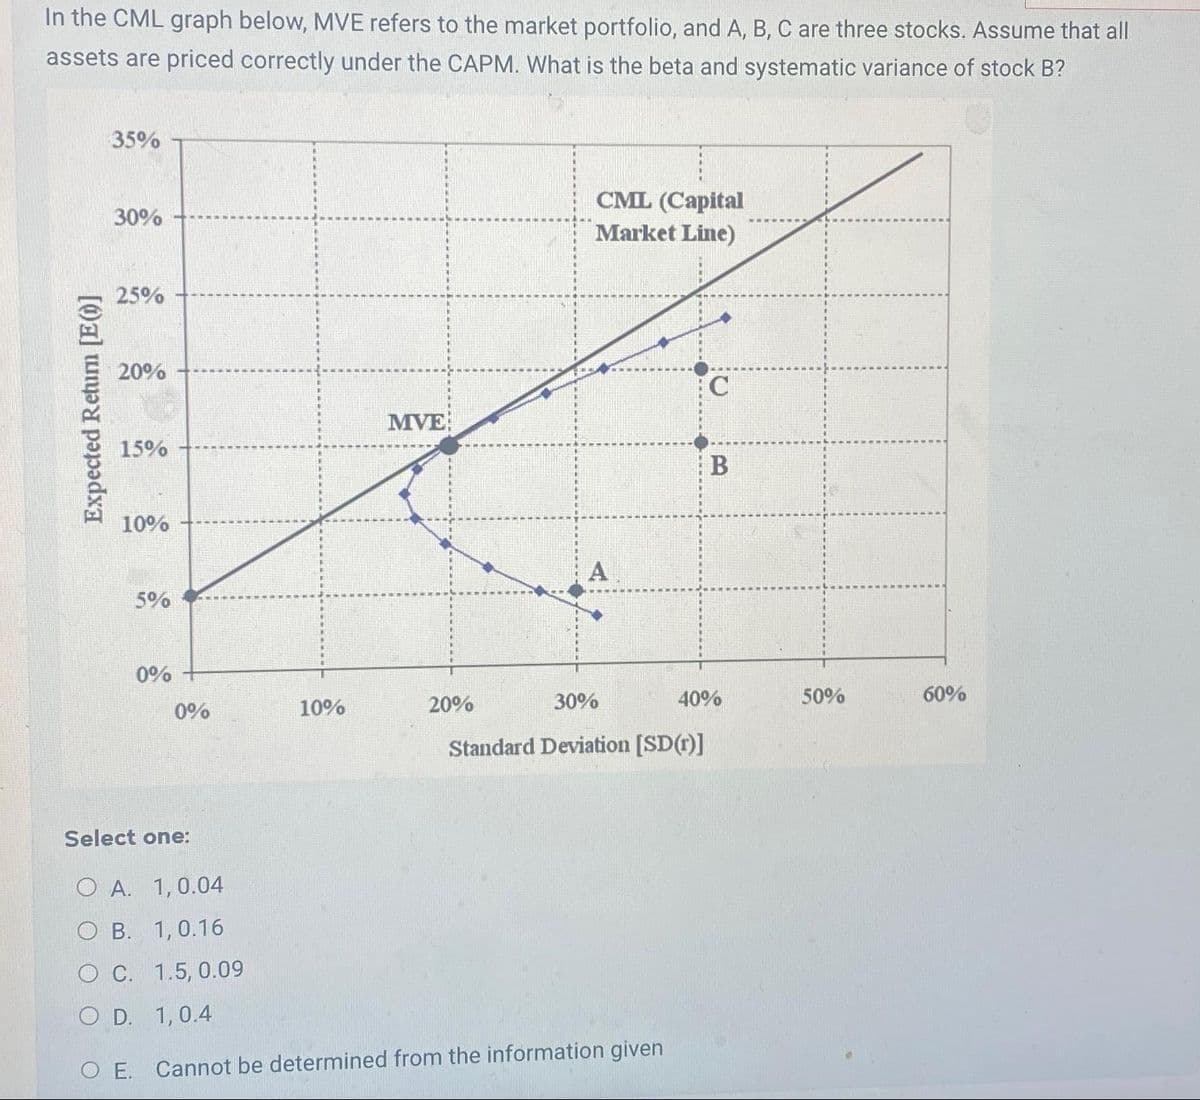 In the CML graph below, MVE refers to the market portfolio, and A, B, C are three stocks. Assume that all
assets are priced correctly under the CAPM. What is the beta and systematic variance of stock B?
Expected Return [E]
35%
30%
25%
20%
15%
10%
5%
OE.
0%
0%
Select one:
O A. 1, 0.04
O B. 1, 0.16
O C.
O D.
10%
MVE
CML (Capital
Market Line)
20%
A
30%
Standard Deviation [SD(r)]
1.5, 0.09
1, 0.4
Cannot be determined from the information given
C
B
40%
50%
60%